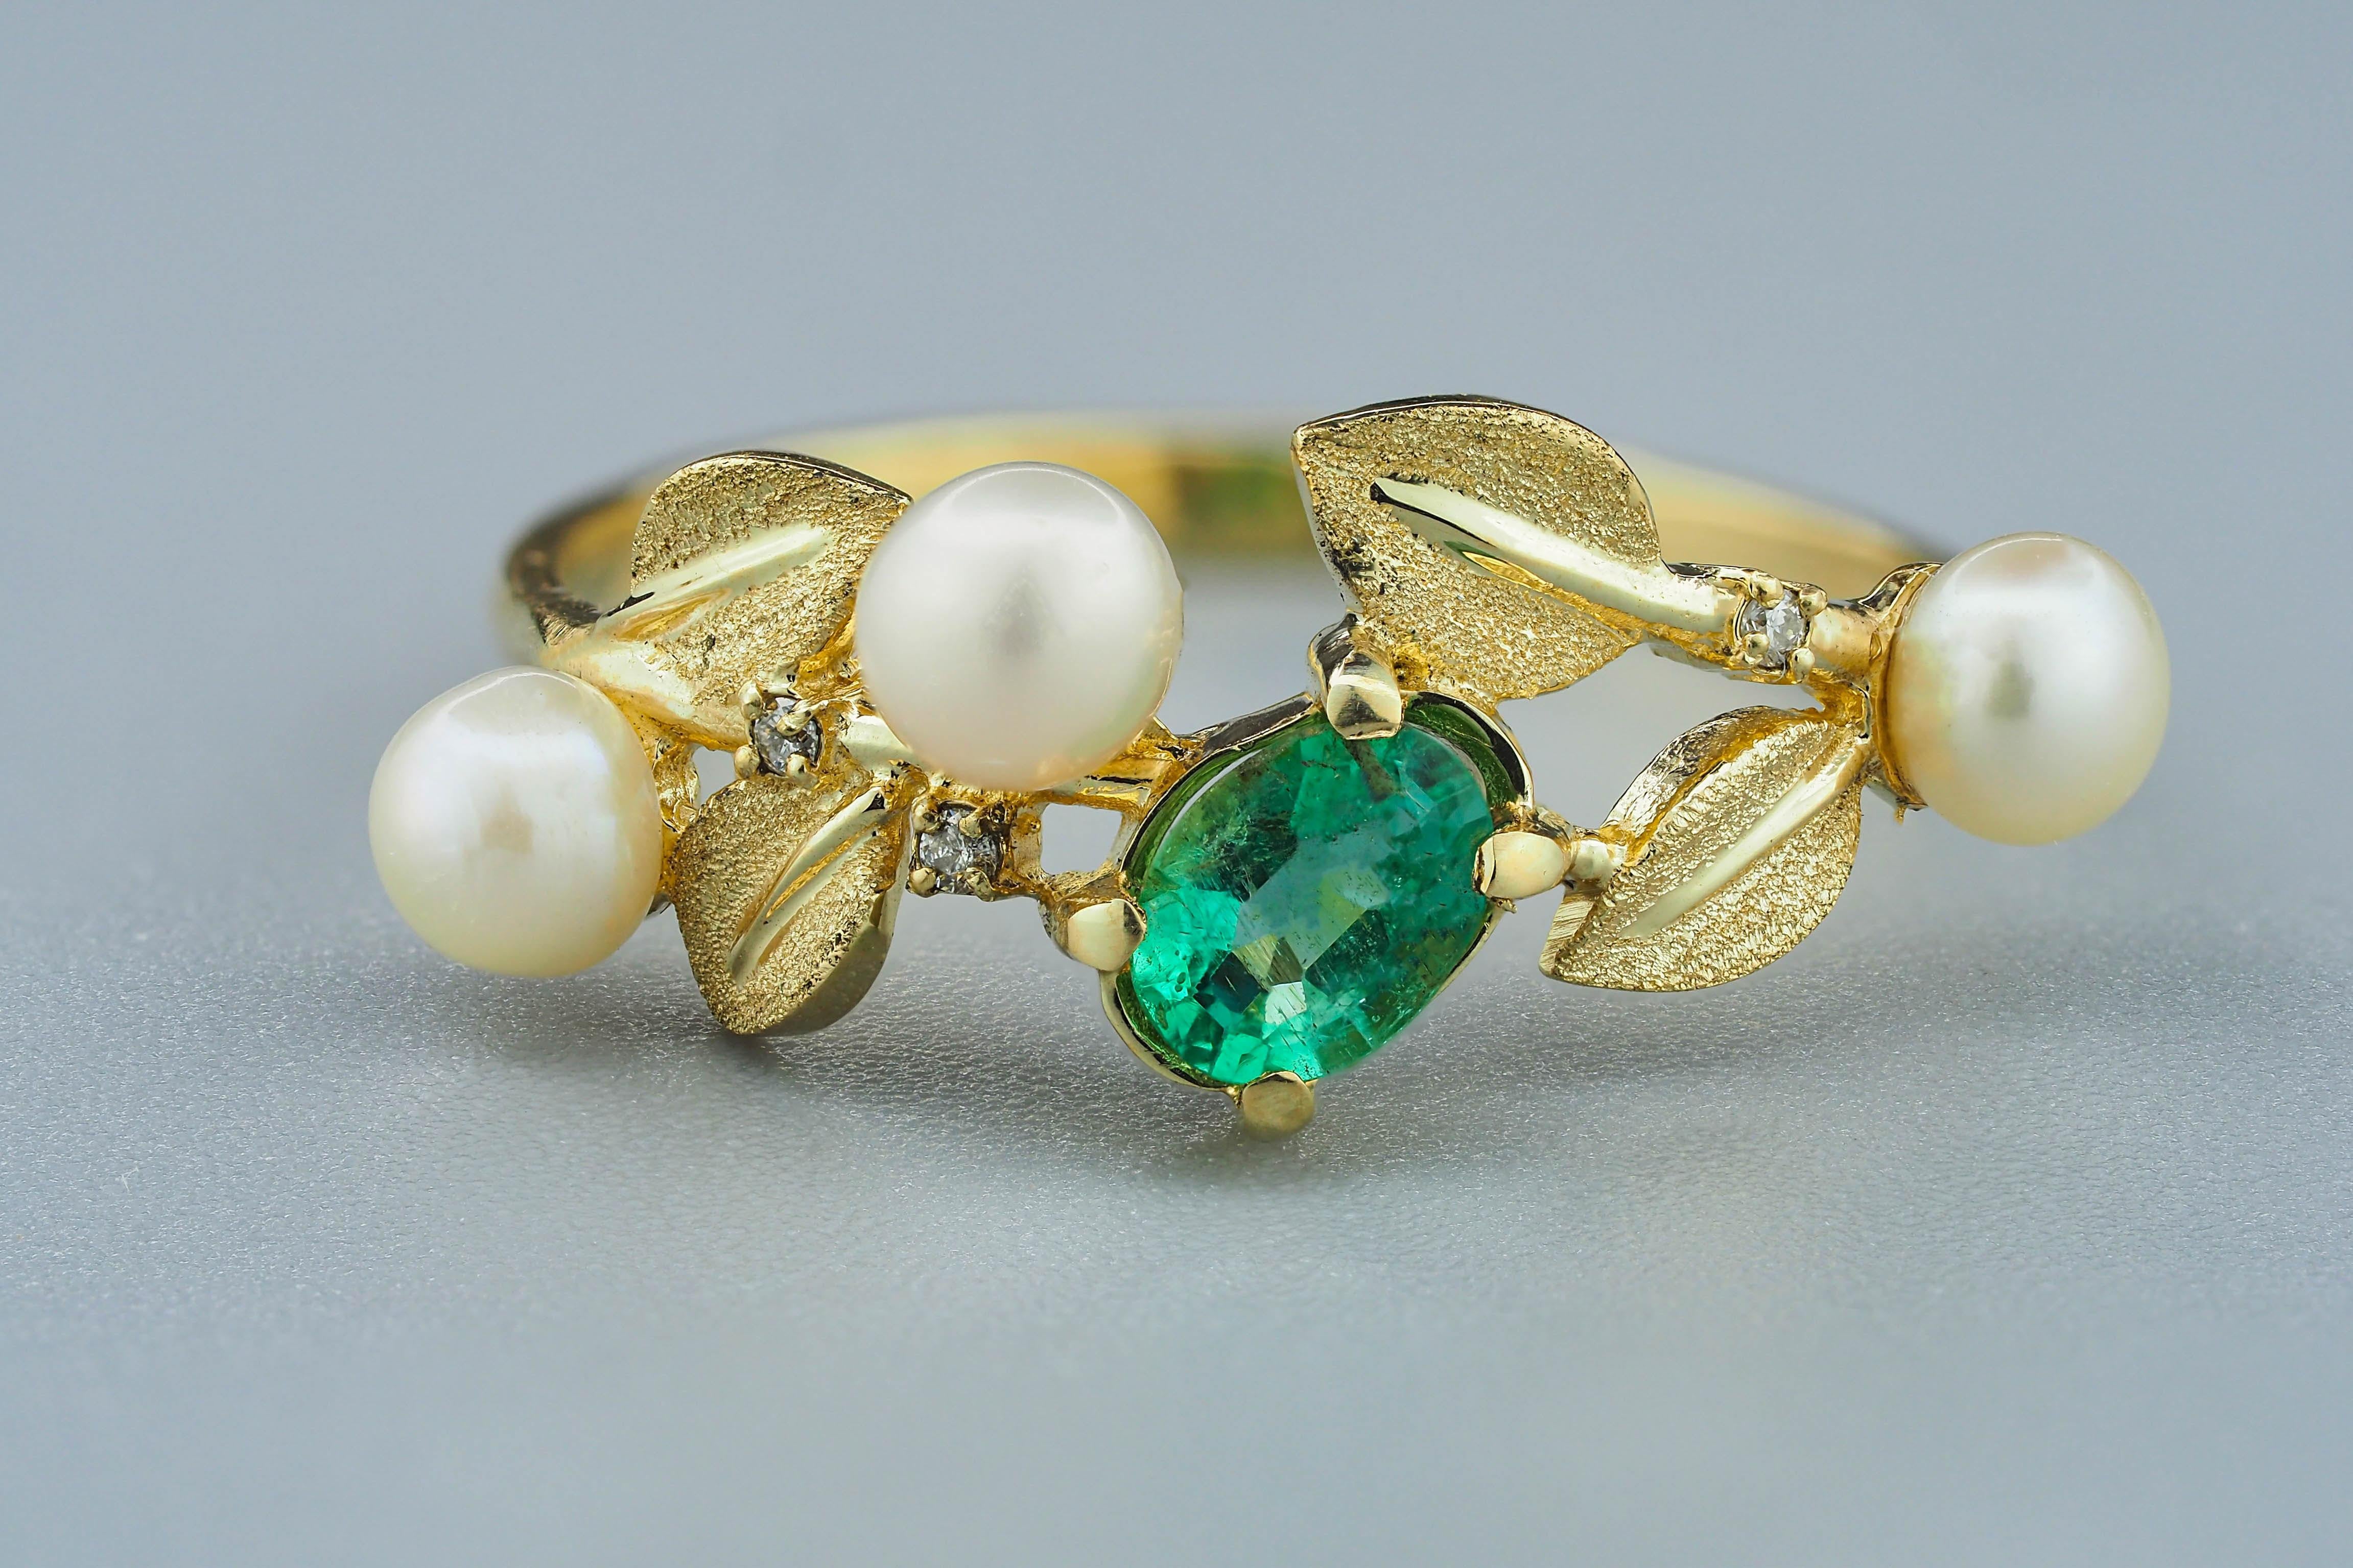 For Sale:  14k Gold Ring with Emerald, Pearls and Diamonds 9